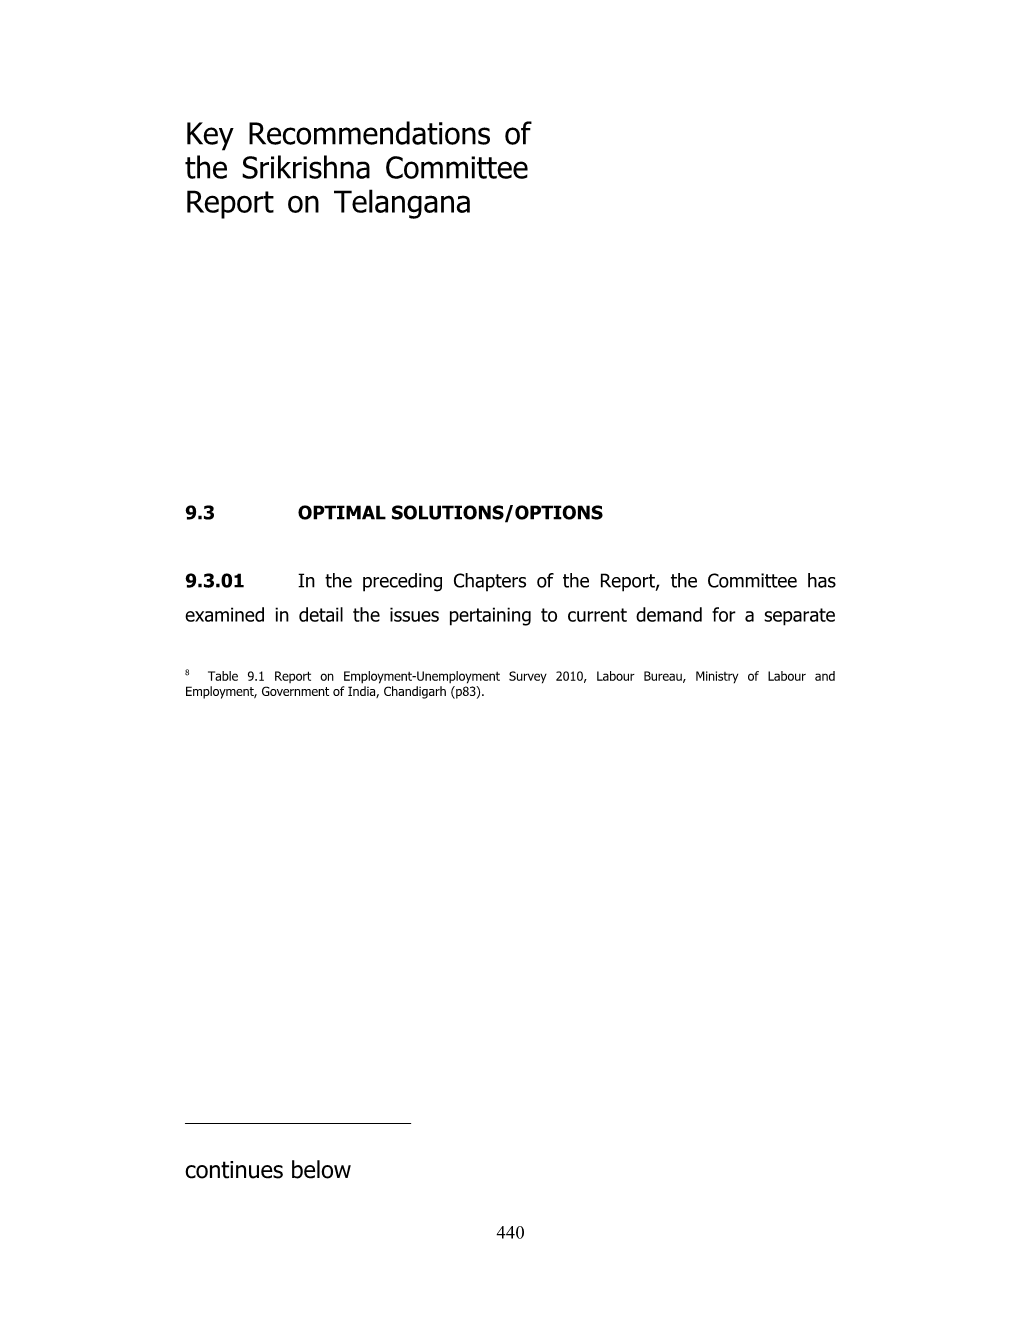 Key Recommendations of the Srikrishna Committee Report on Telangana